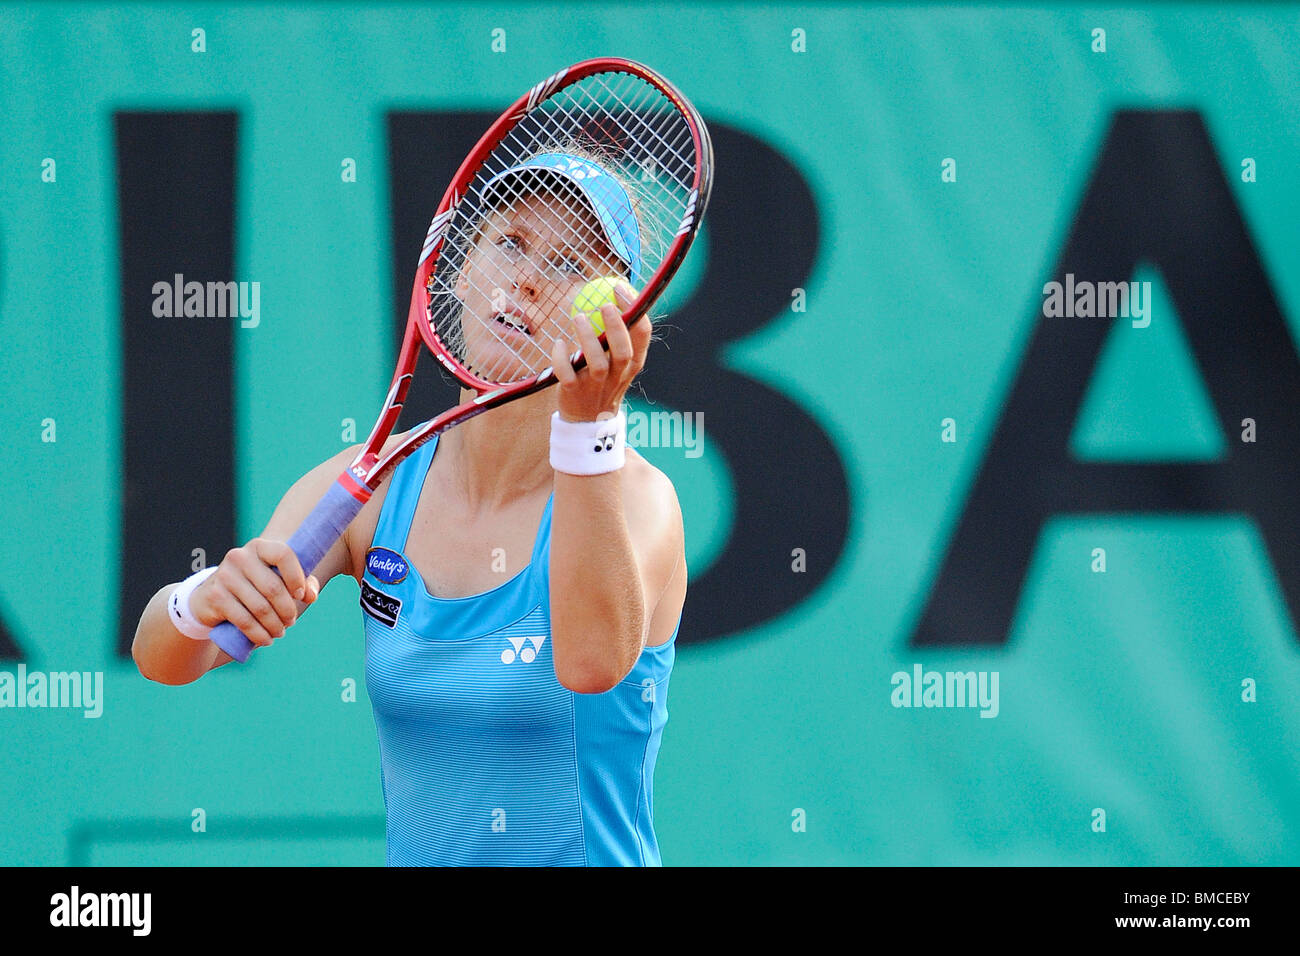 Elena Dementieva (RUS) competing at the 2010 French Open Stock Photo